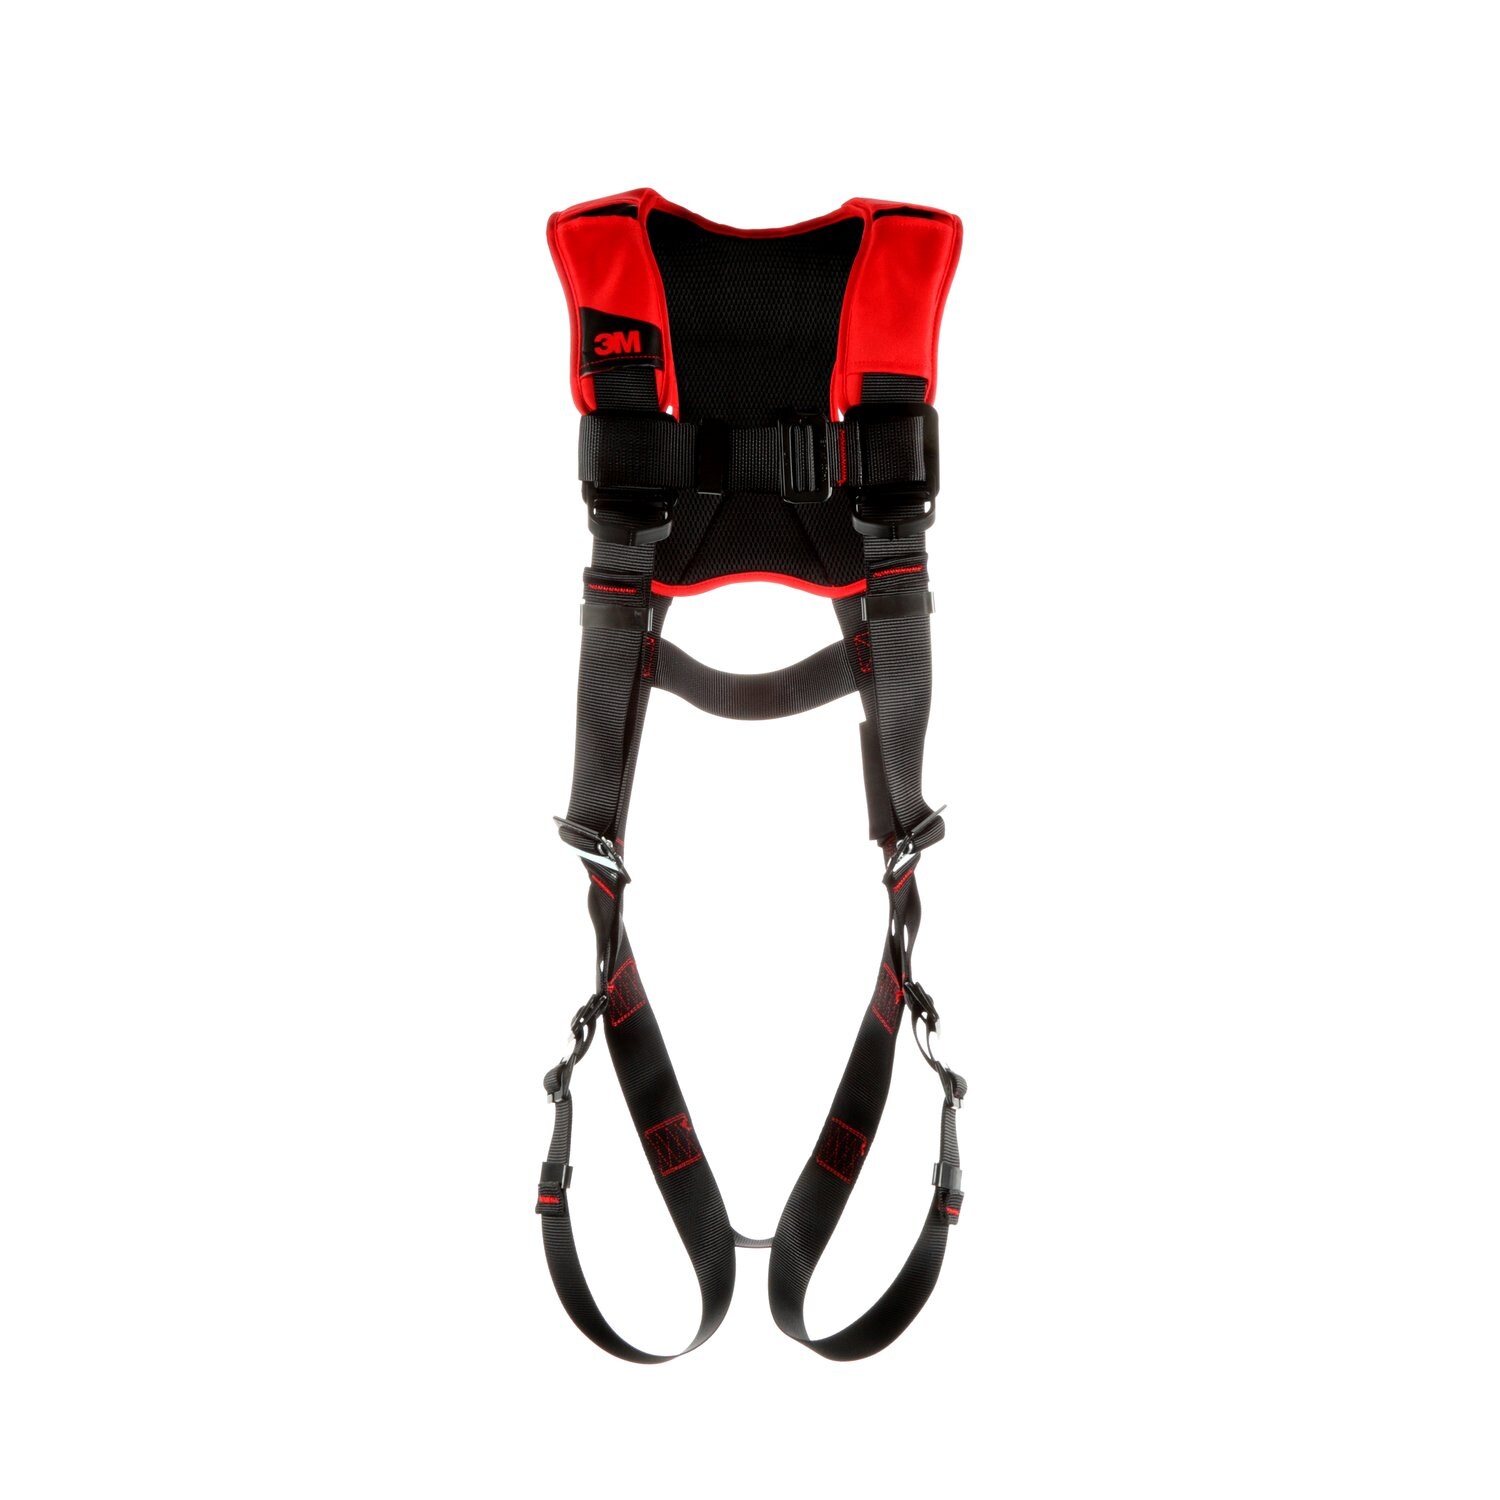 7012816701 - 3M Protecta P200 Comfort Vest Safety Harness 1161425, X-Large